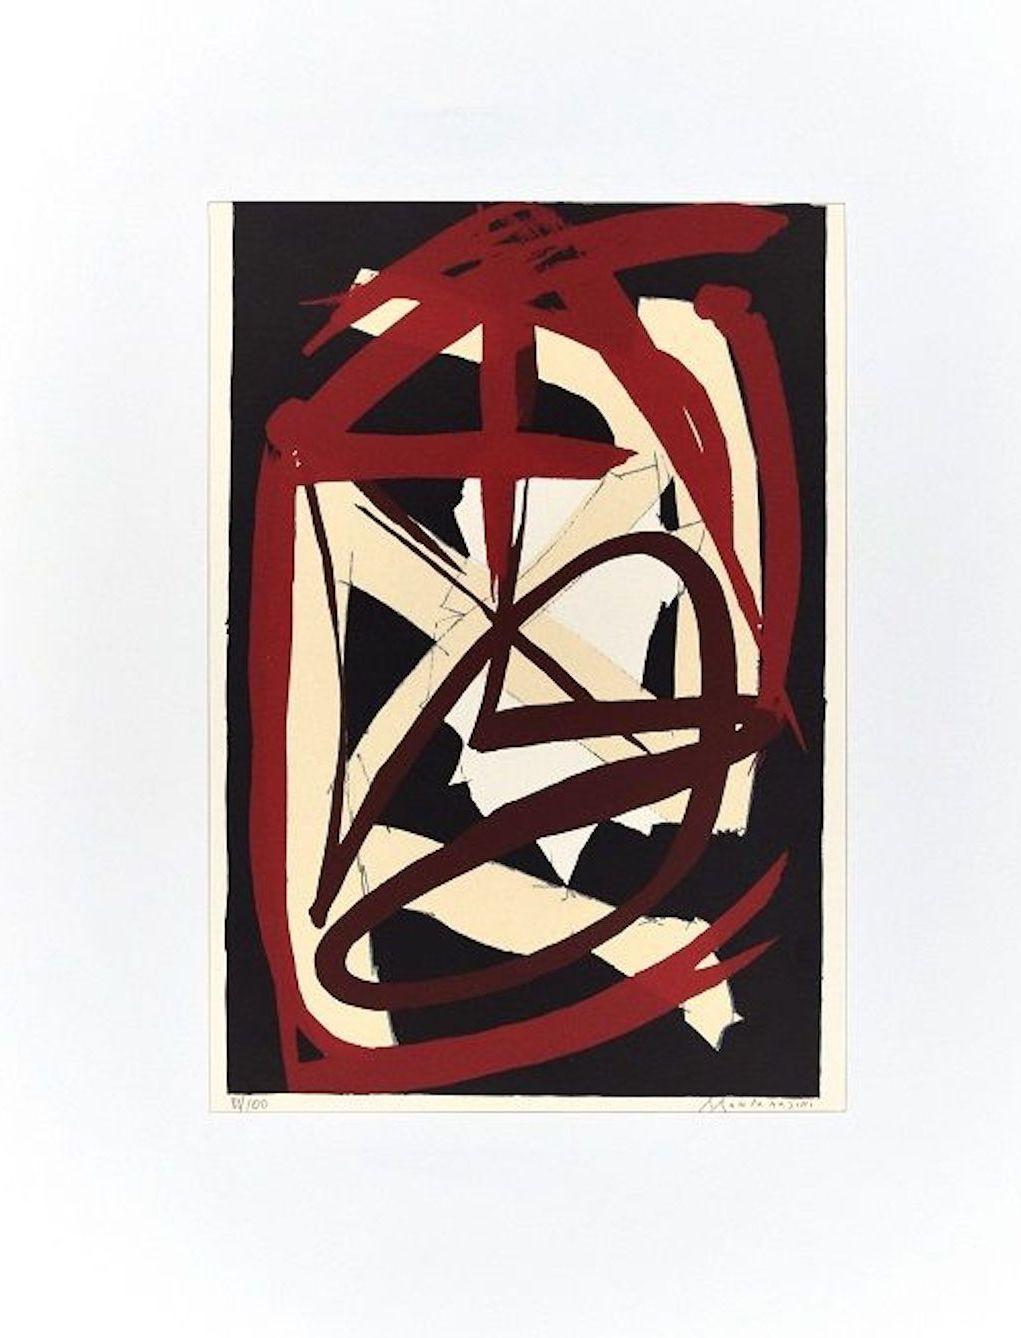 Abstract Composition is a beautiful colored serigraph on cream-colored paper, realized in the 1970's by the Italian artist, Luigi Montanarini (1906-1998) and published by La Nuova Foglio, a publishing house of Macerata, Italy, as the dry-stamp